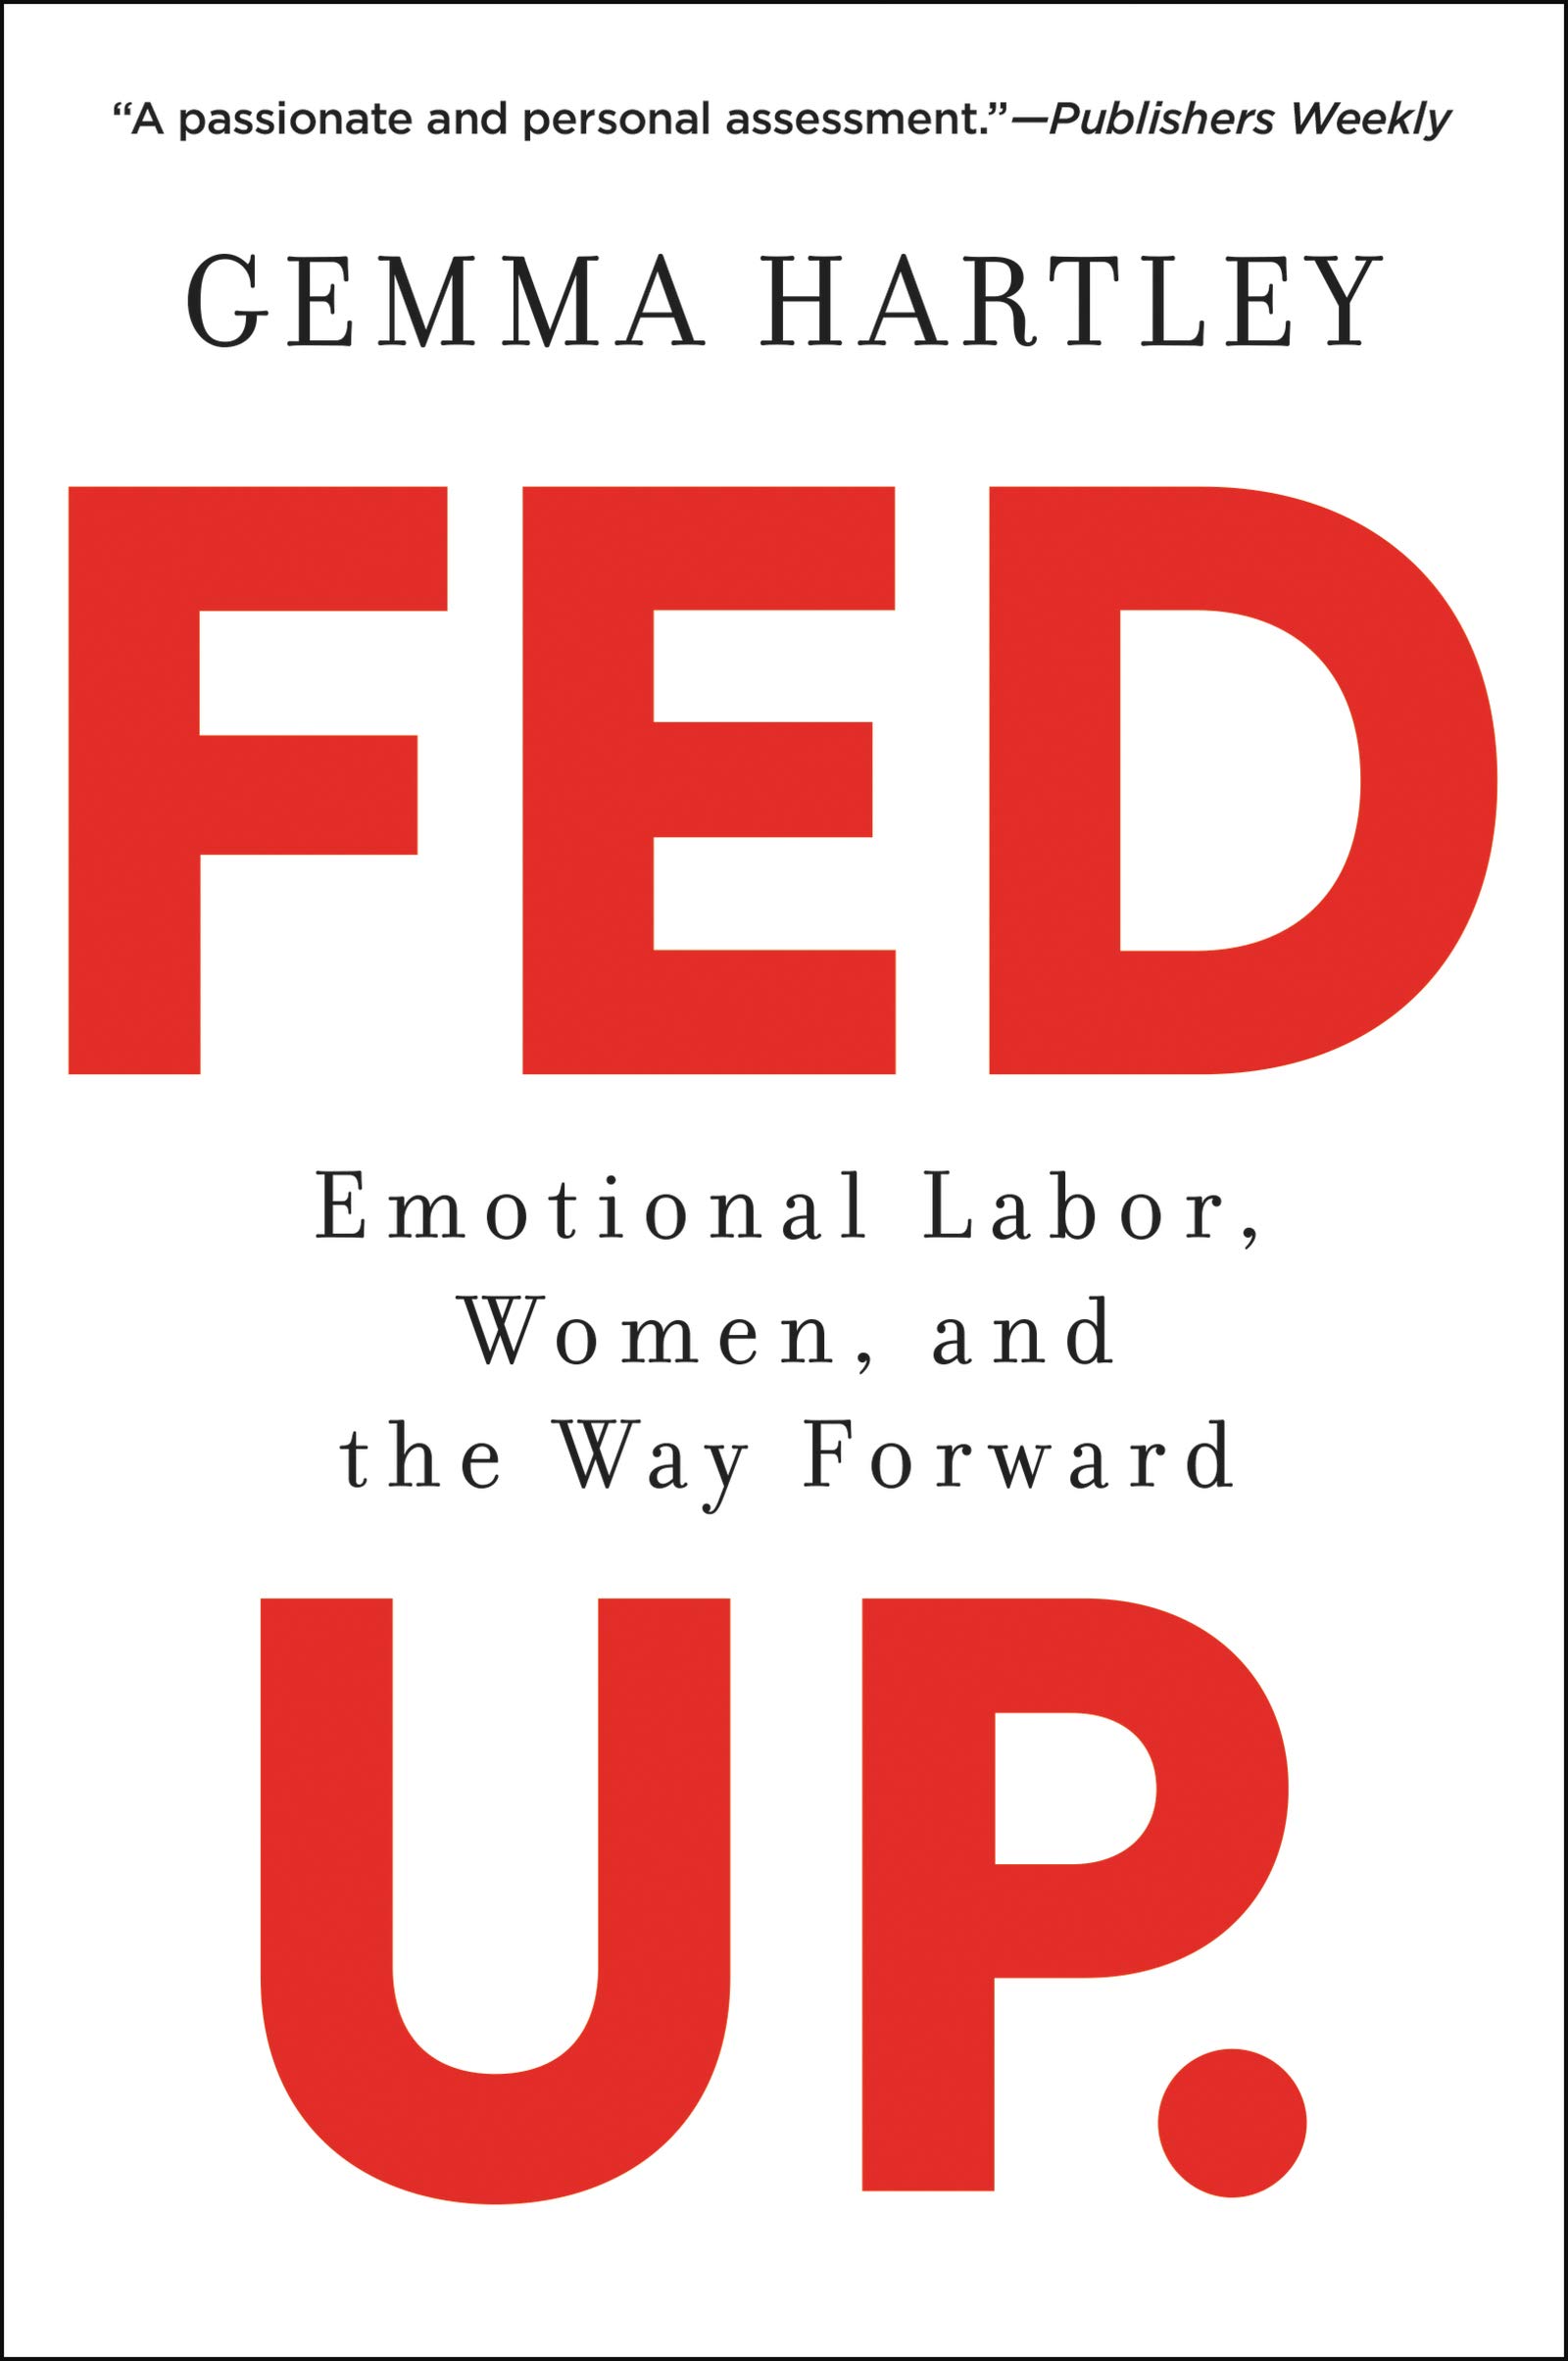 Fed Up- Emotional Labor, Women, and the Way Forward